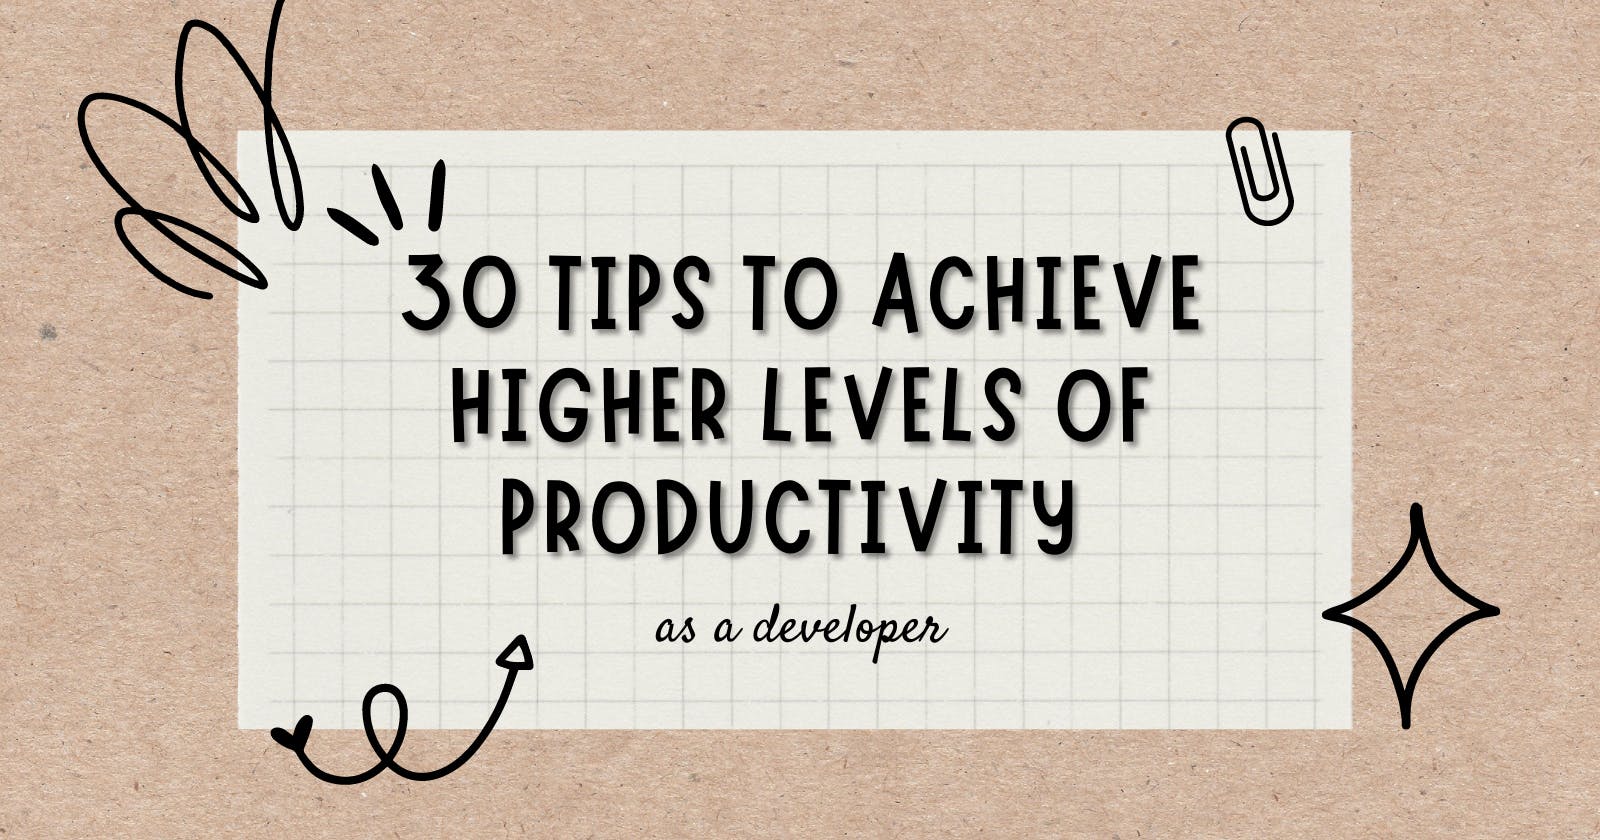 30 Tips to Achieve Higher Levels of Productivity as a developer